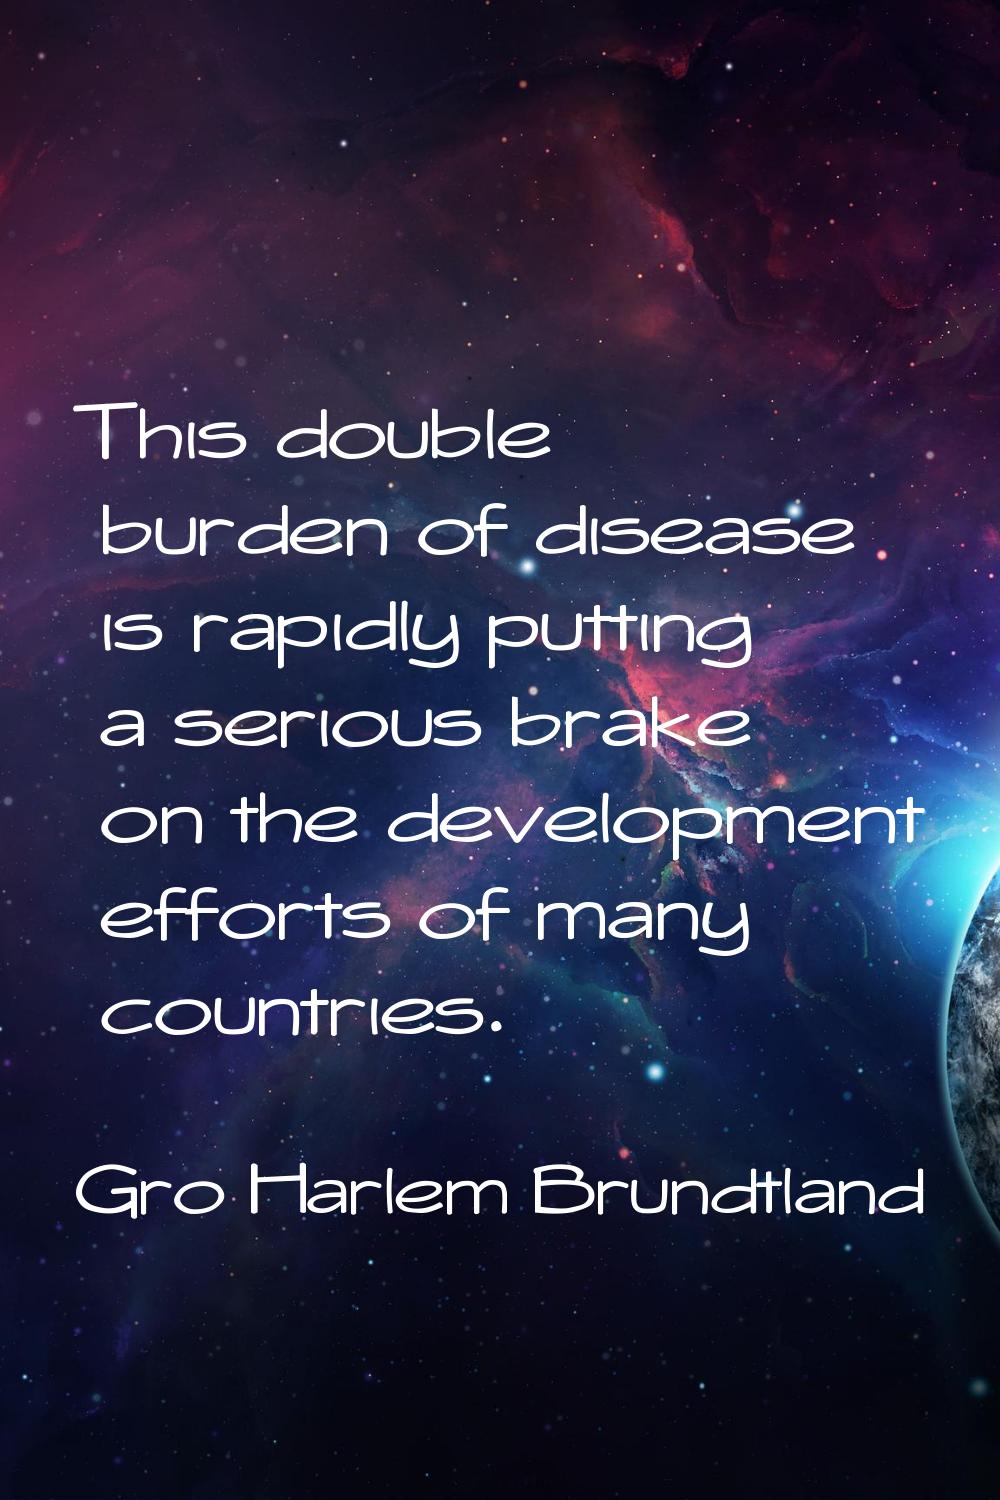 This double burden of disease is rapidly putting a serious brake on the development efforts of many